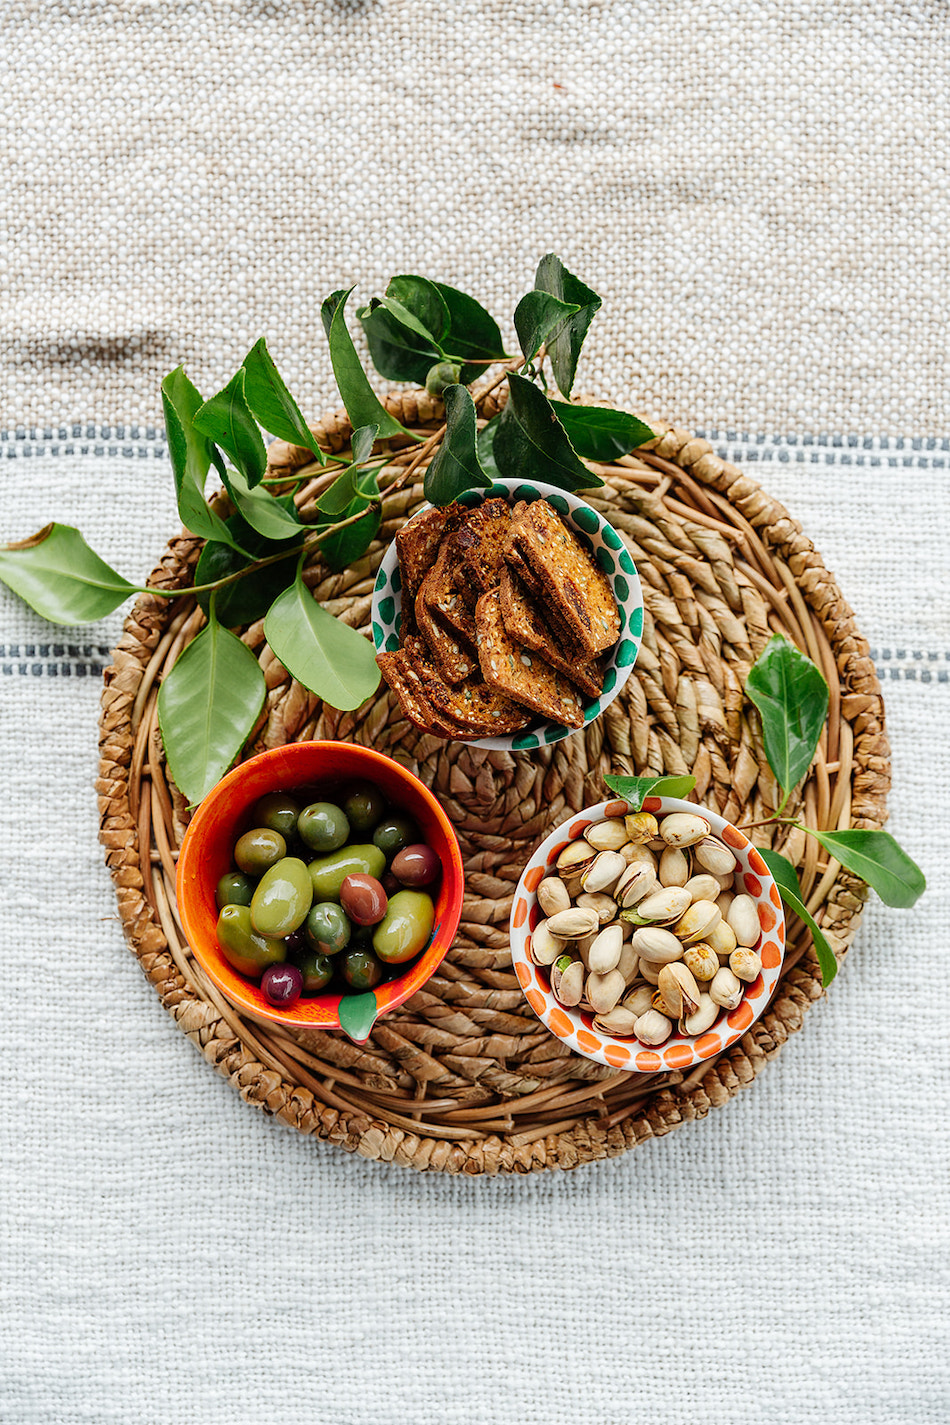 olives and pistachios, appetizers for entertaining with target